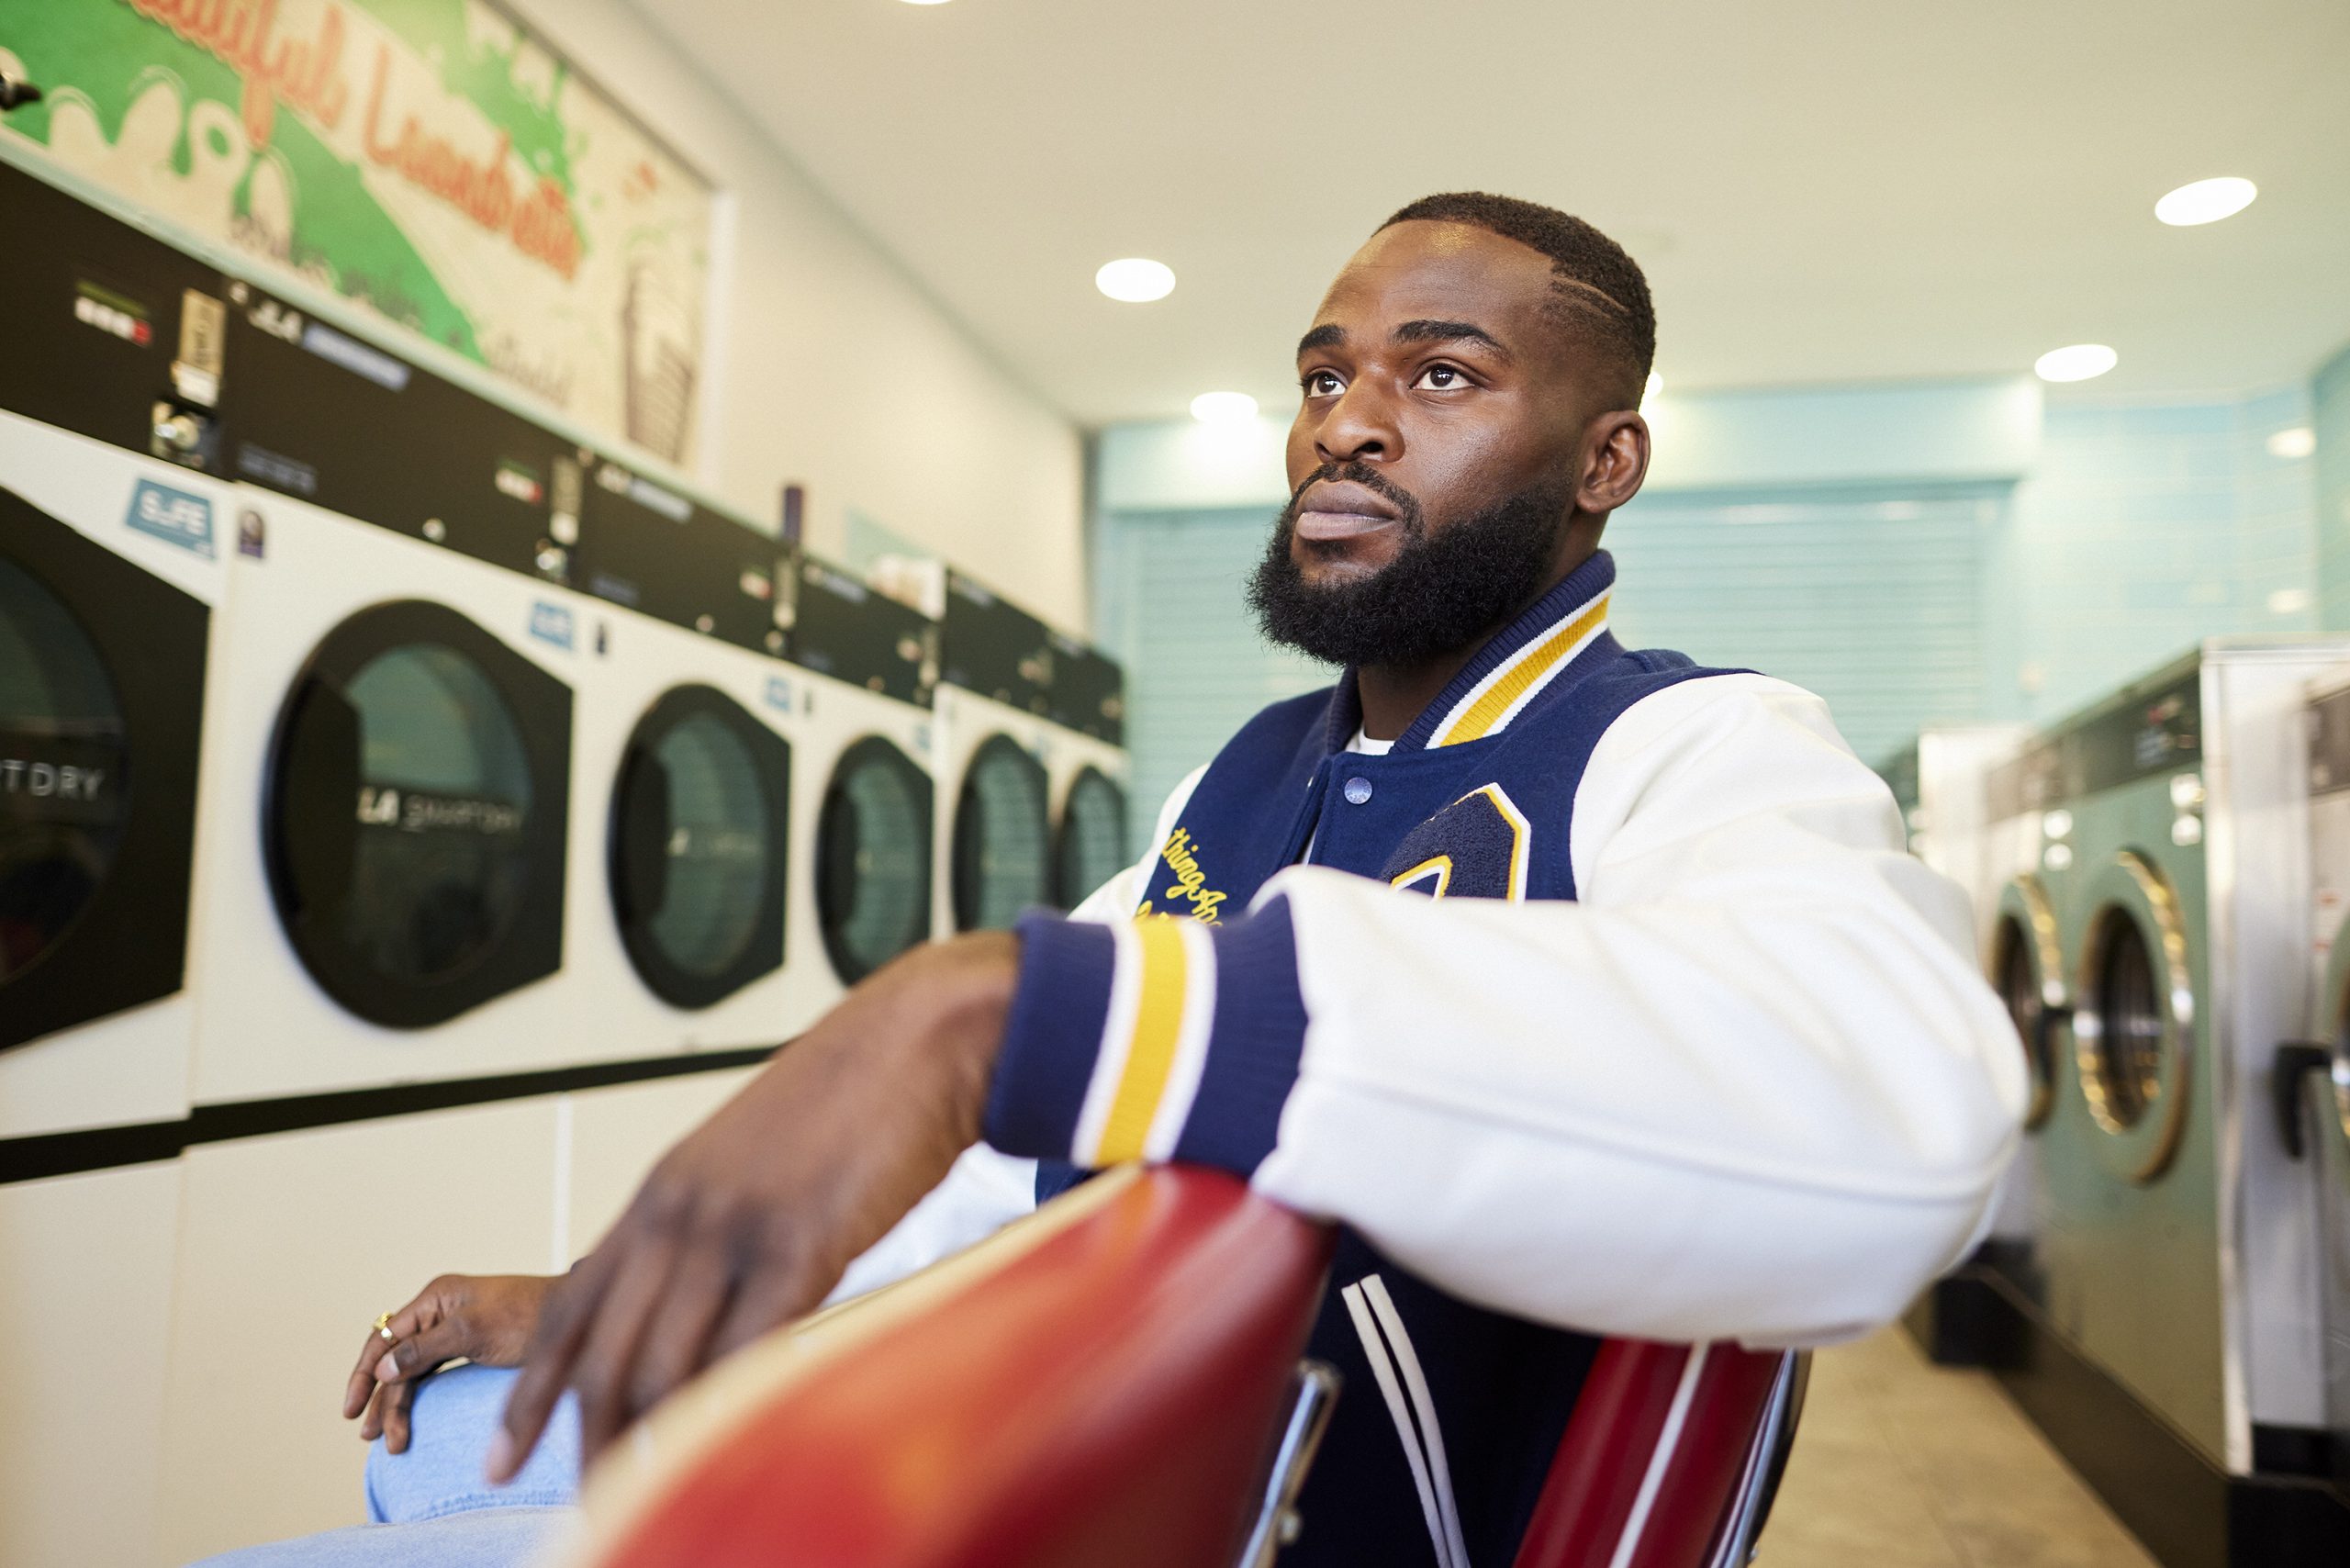 Joshua Buatsi sat on some red plastic chairs in a laundromat